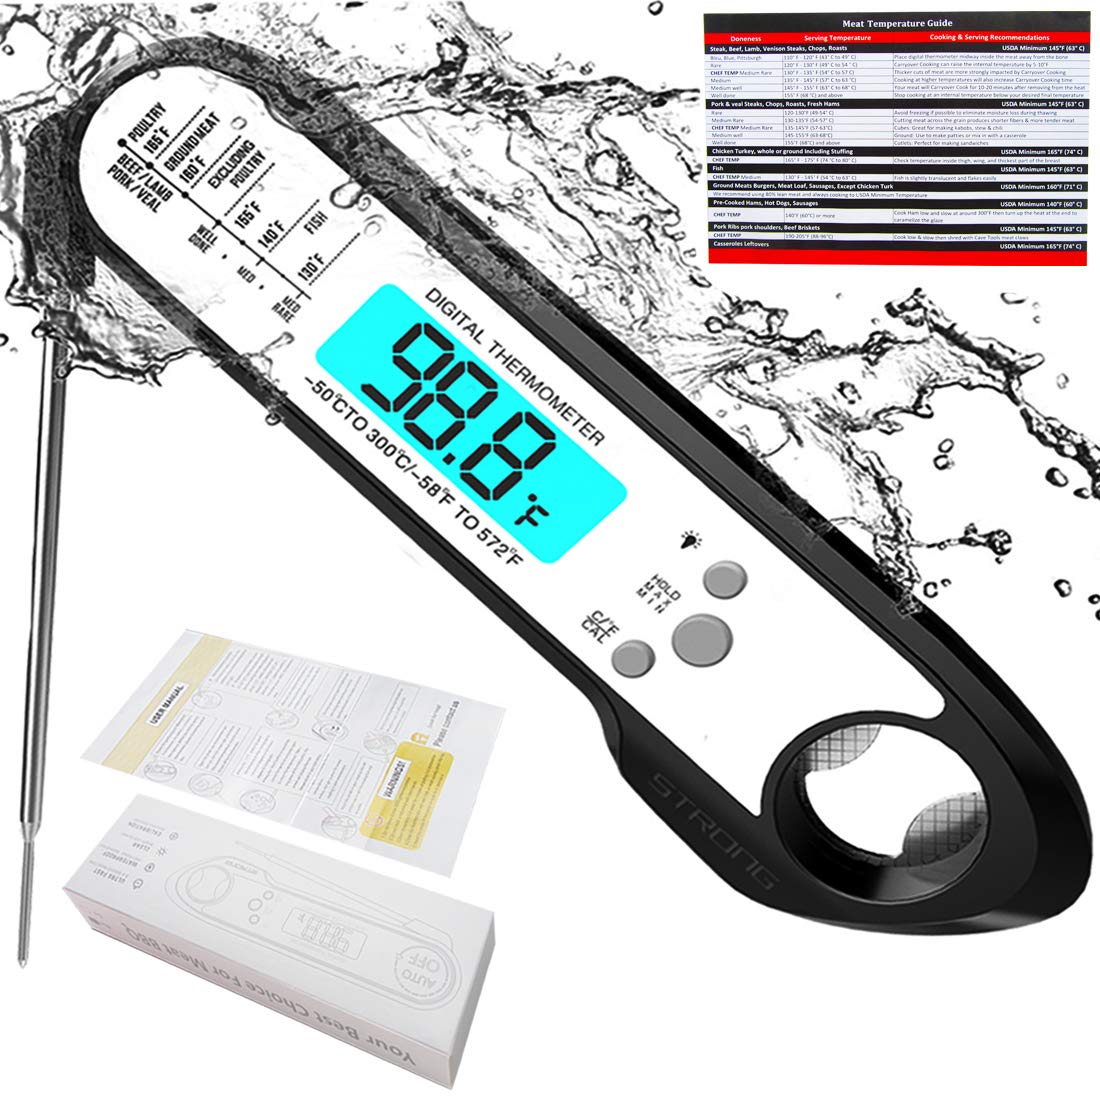 IP67 Waterproof Kitchen Foldable Thermometer Digital Meat Thermometer Fast Instant Read BBQ Thermometer with Calibration and Backlit Function Cooking Thermometer for Food, Candy, Grill, Smokers, Black